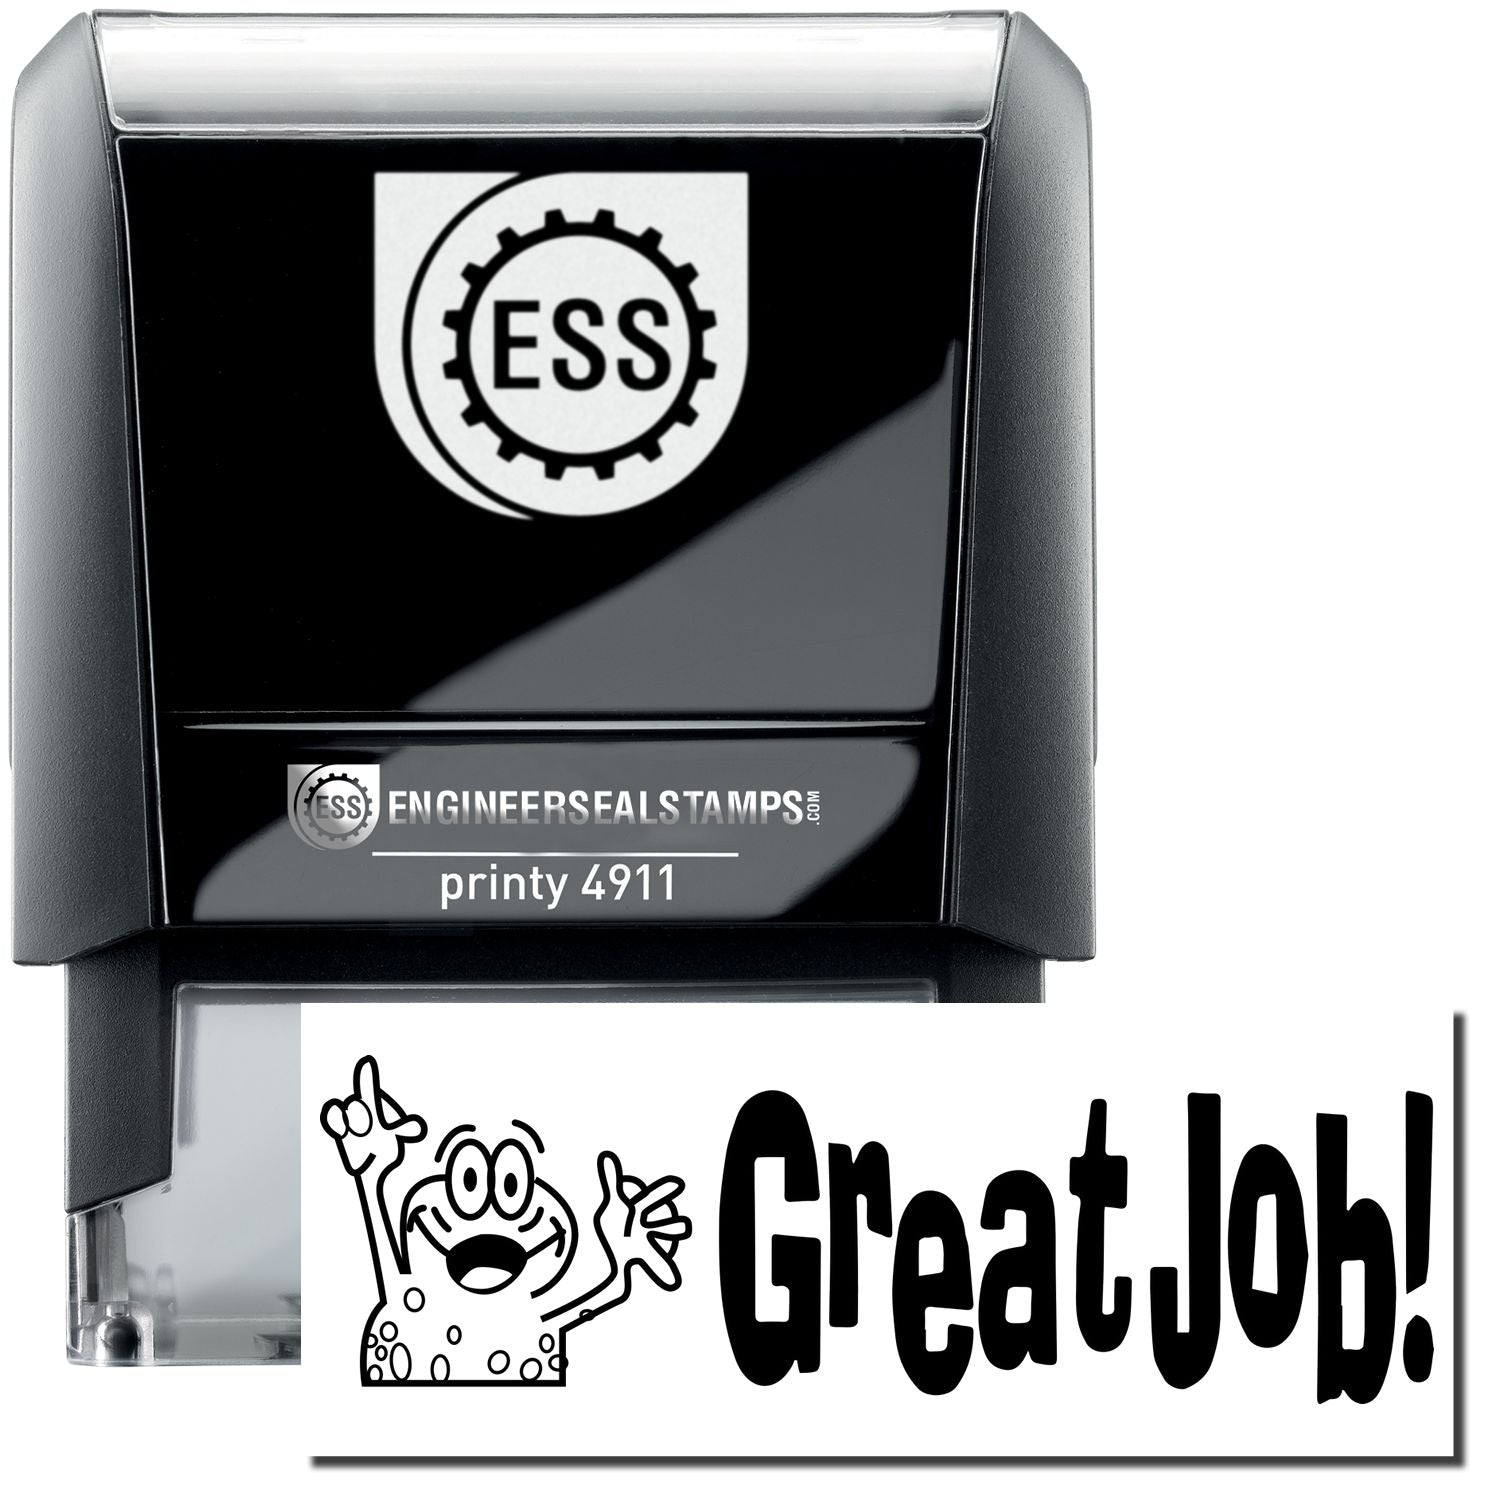 A self-inking stamp with a stamped image showing how the text "Great Job!" with an image of a frog with its hand up in the air is displayed after stamping.